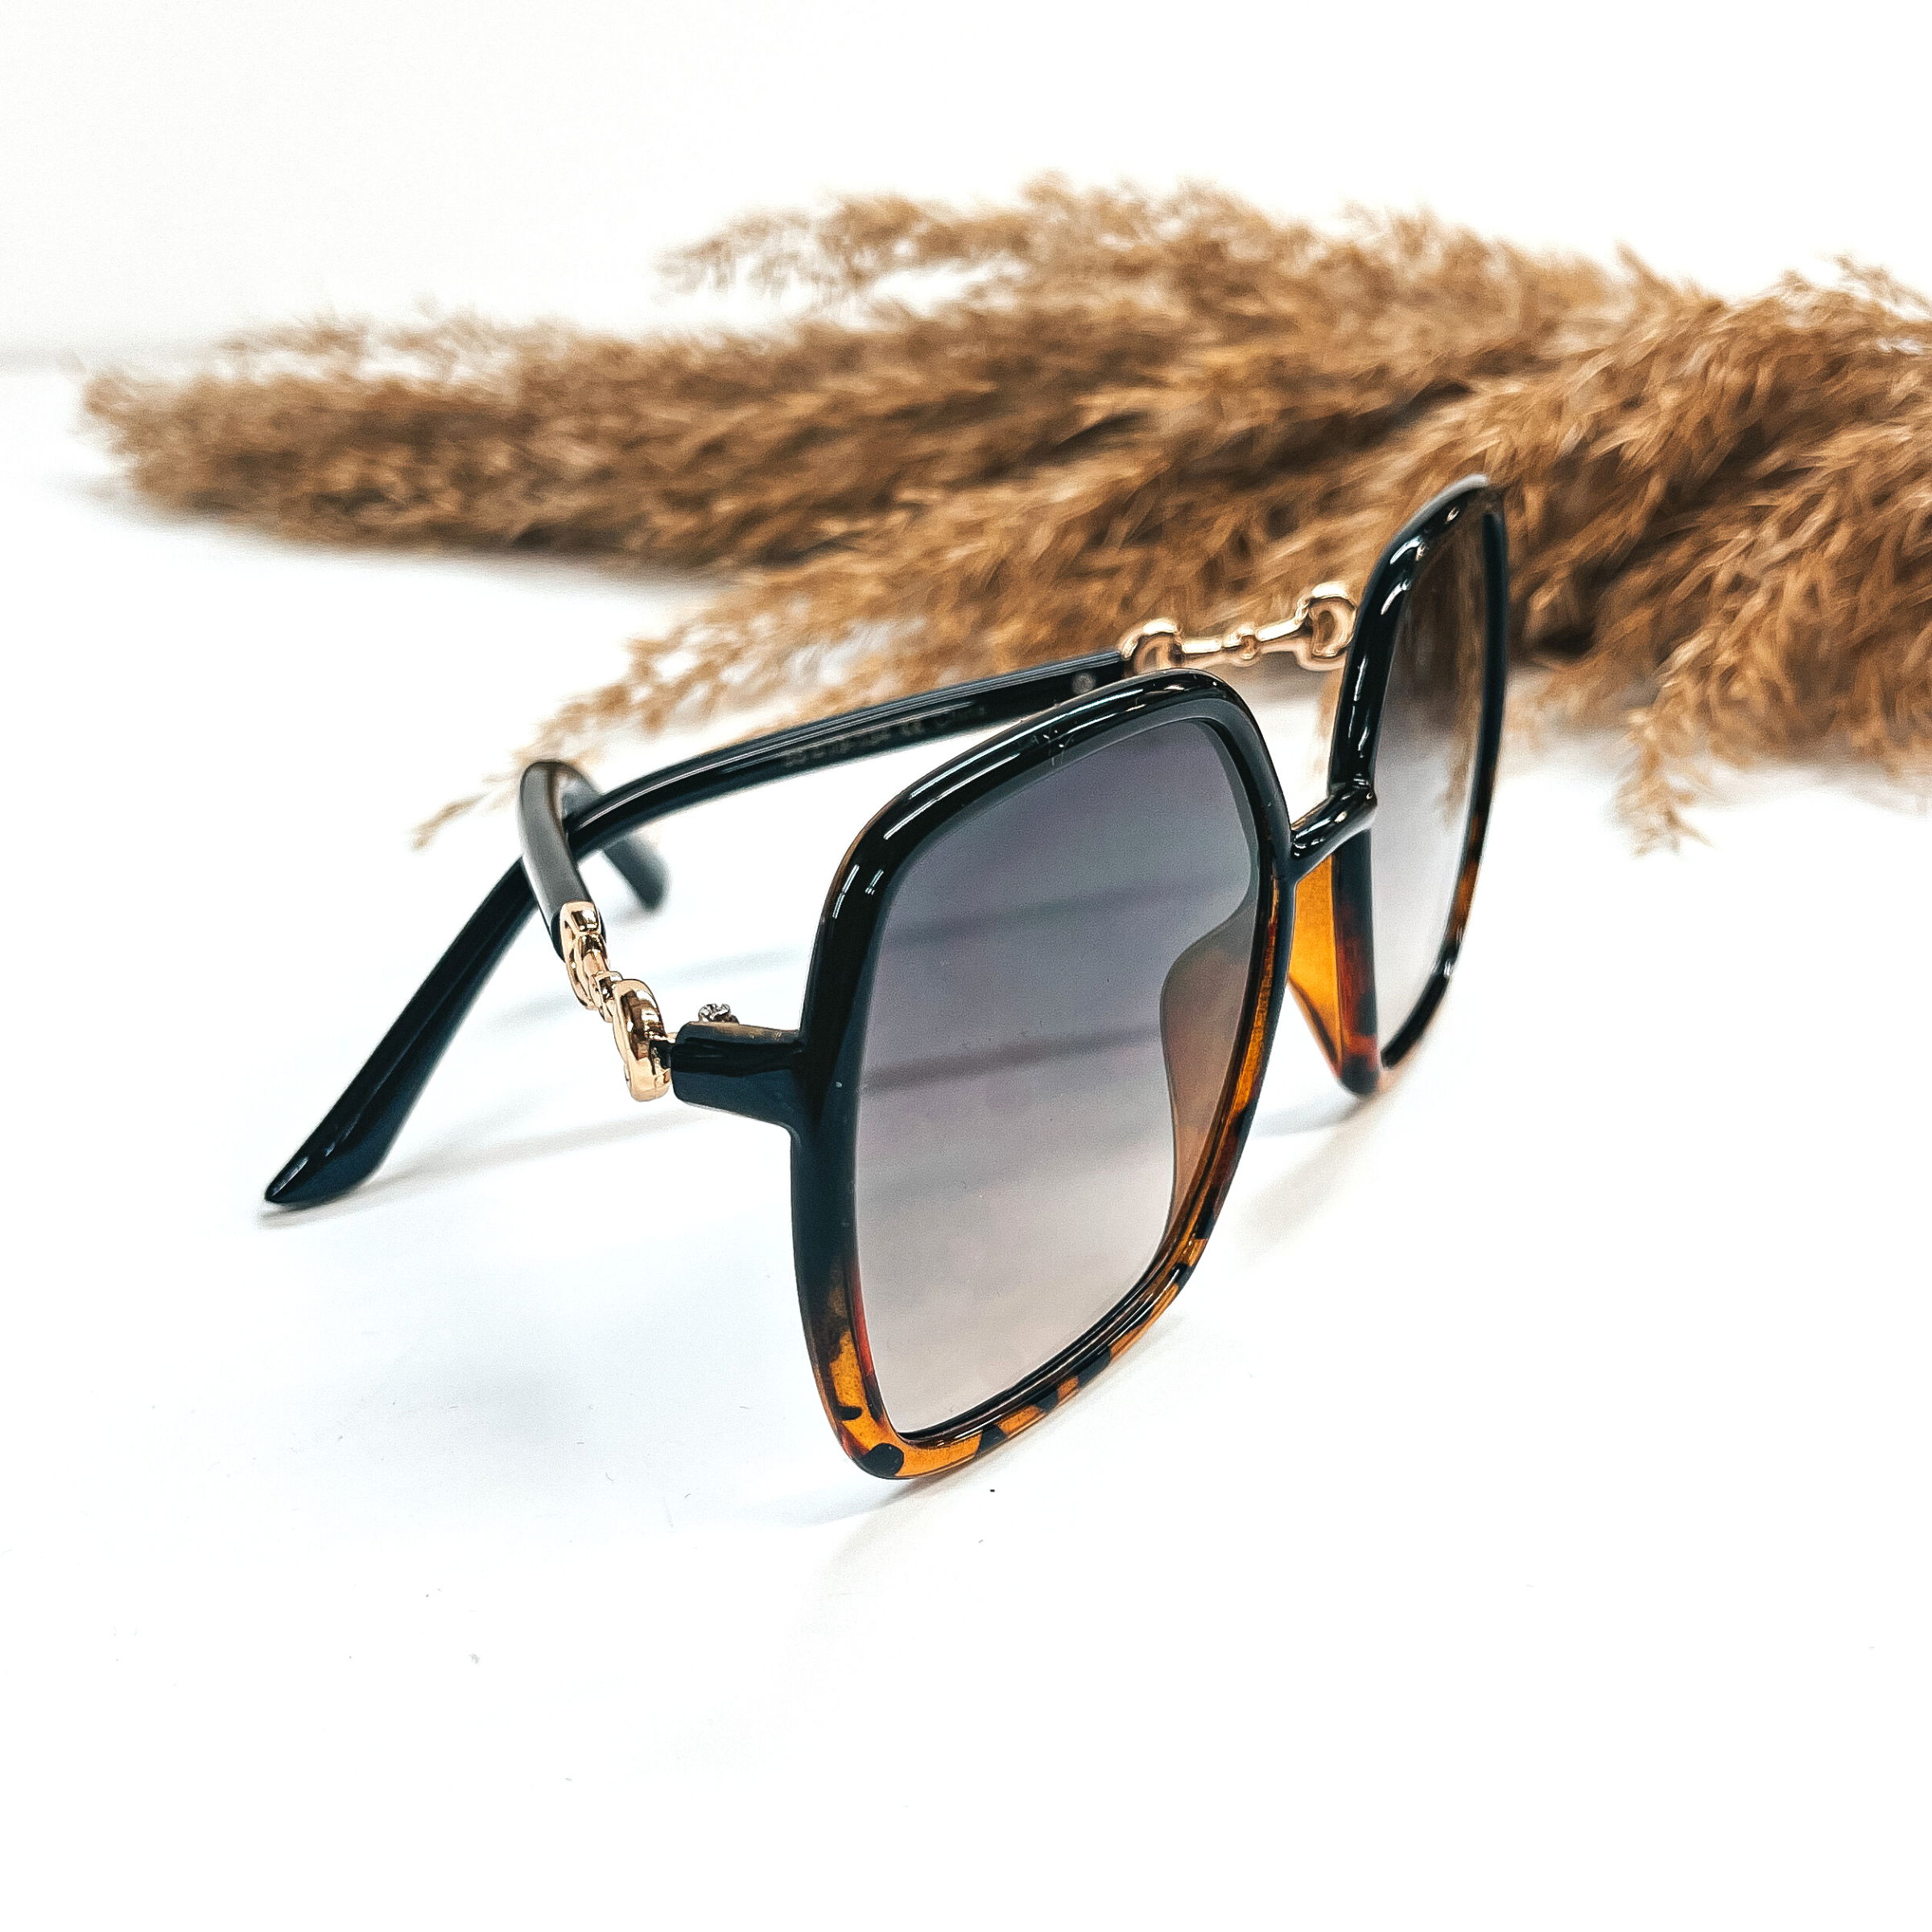 This is a pair of black and tortuoise print frame, large, square sunglasses with a  black/dark grey lense.  The side of the glasses have gold detailing as a connector. These pair of  sunglasses are taken on a white background with a brown plant in the back as decor.